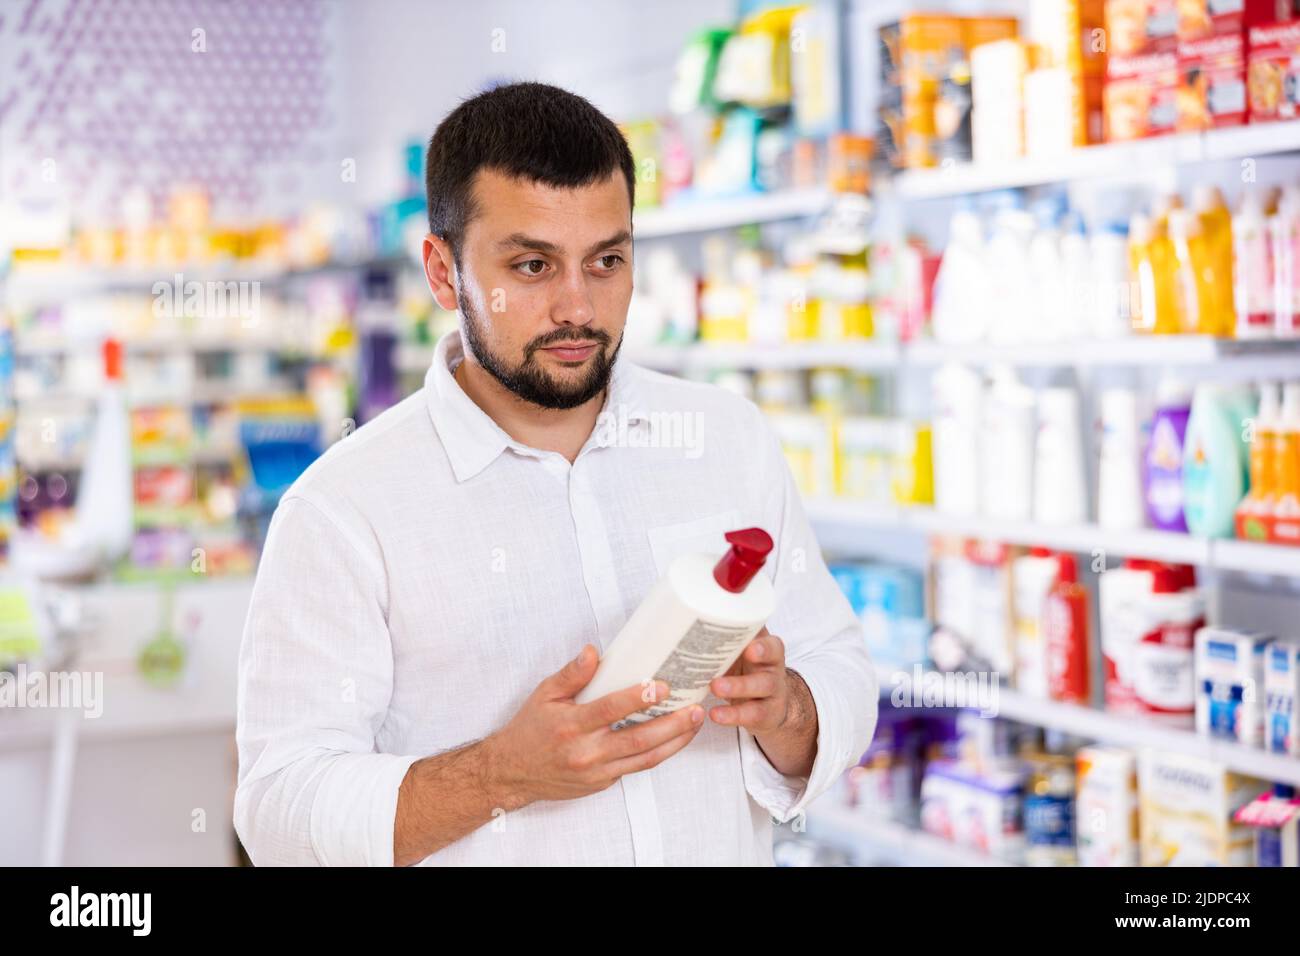 Positive man carefully studying the instructions on bottle of disinfectant Stock Photo